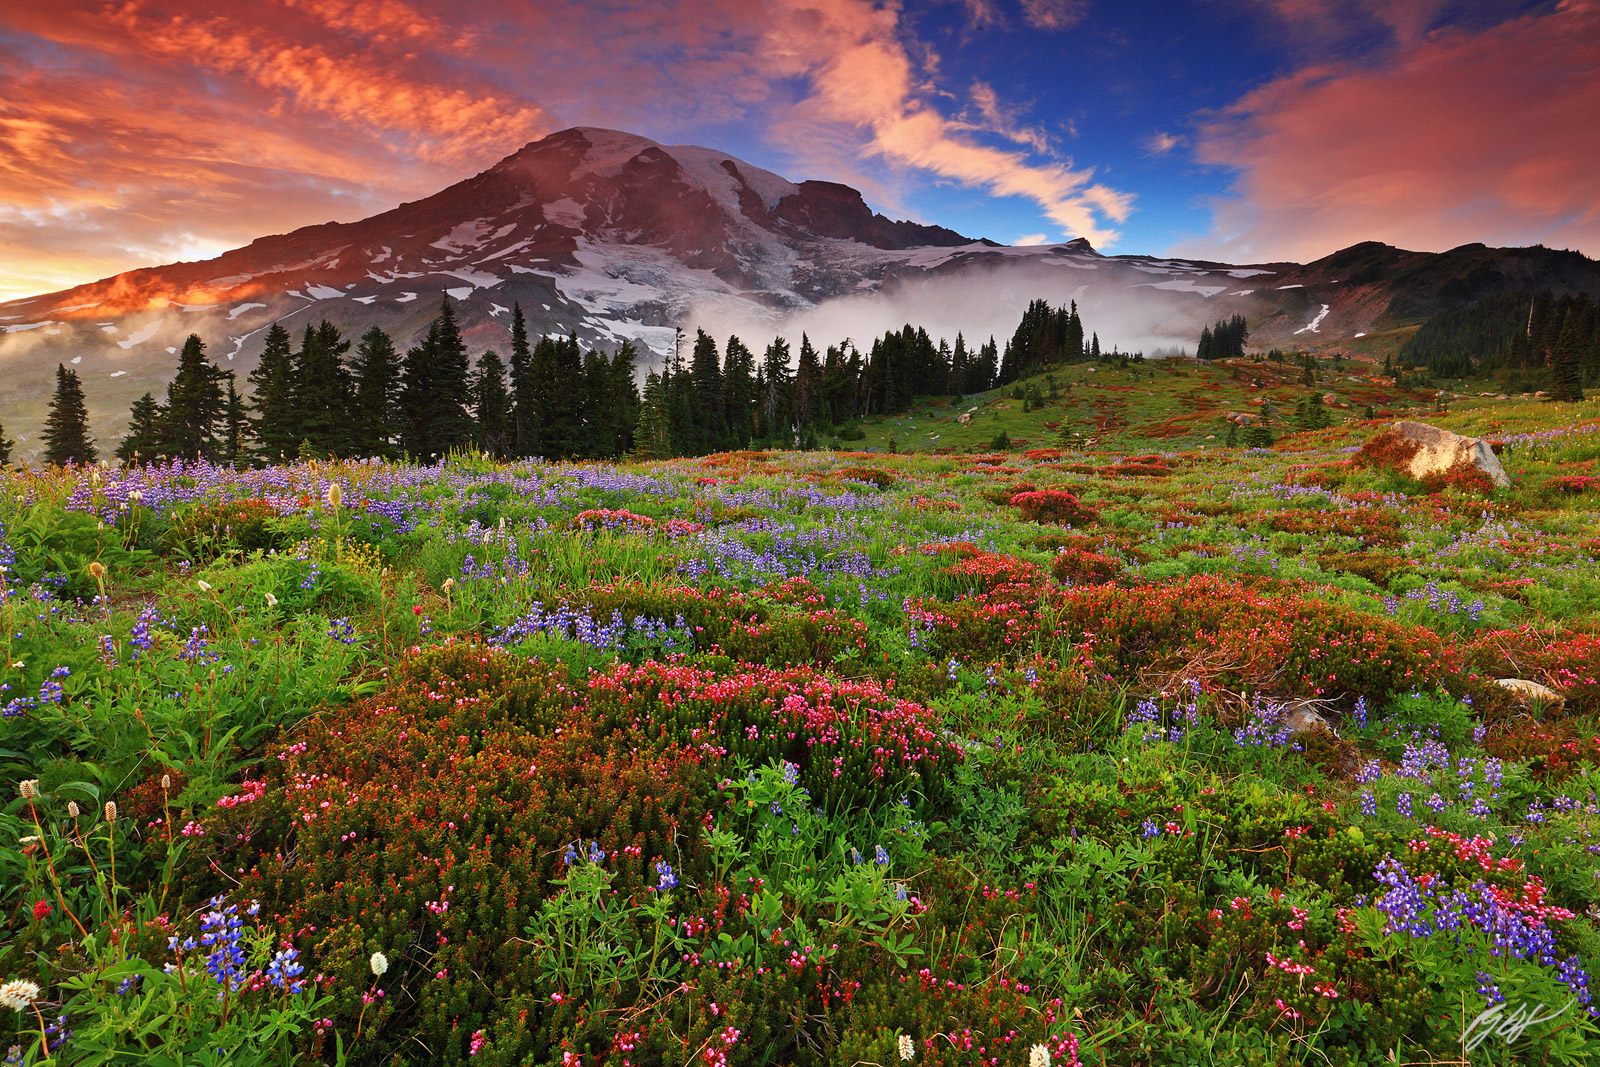 Sunset Wildflowers and Mt Rainier from Paradise Meadows in Mt Rainier National Park in Washington